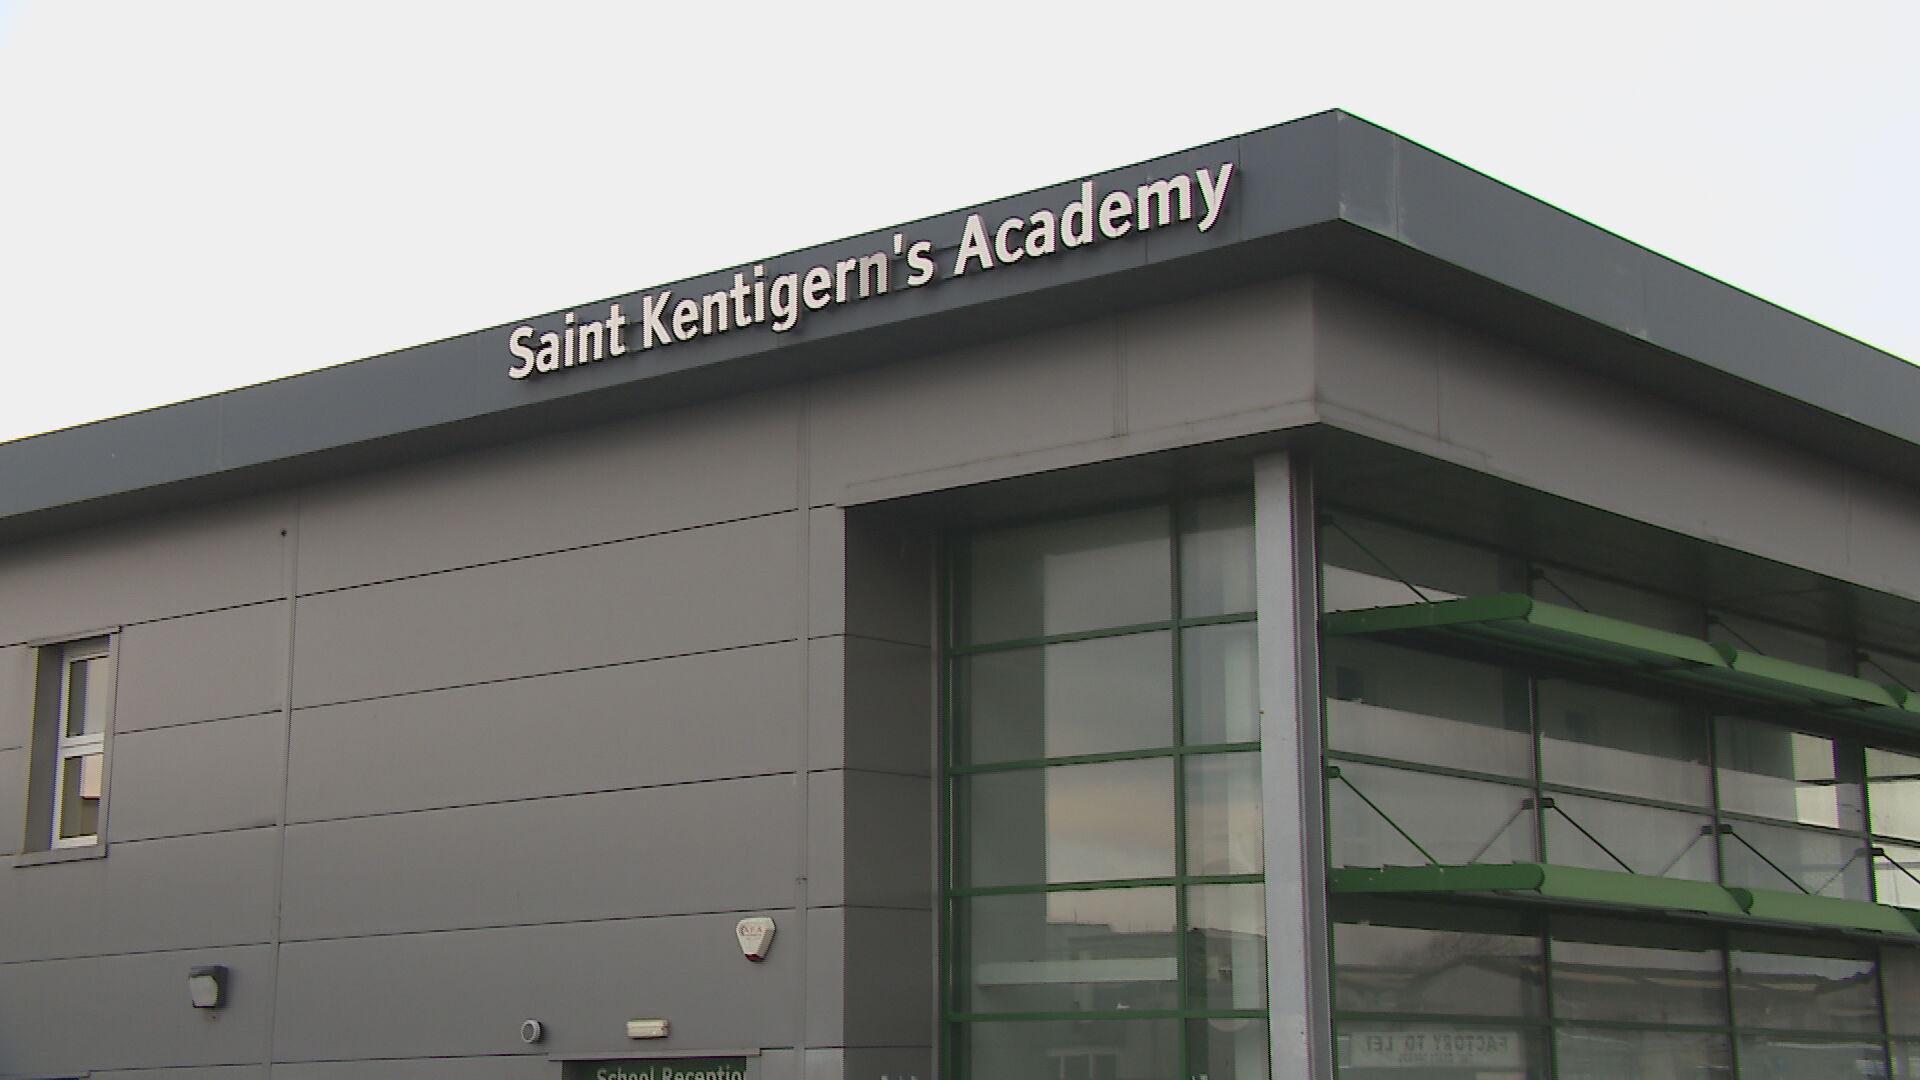 More than half of St Kentigern's Academy remains closed due to the discovery of RAAC.